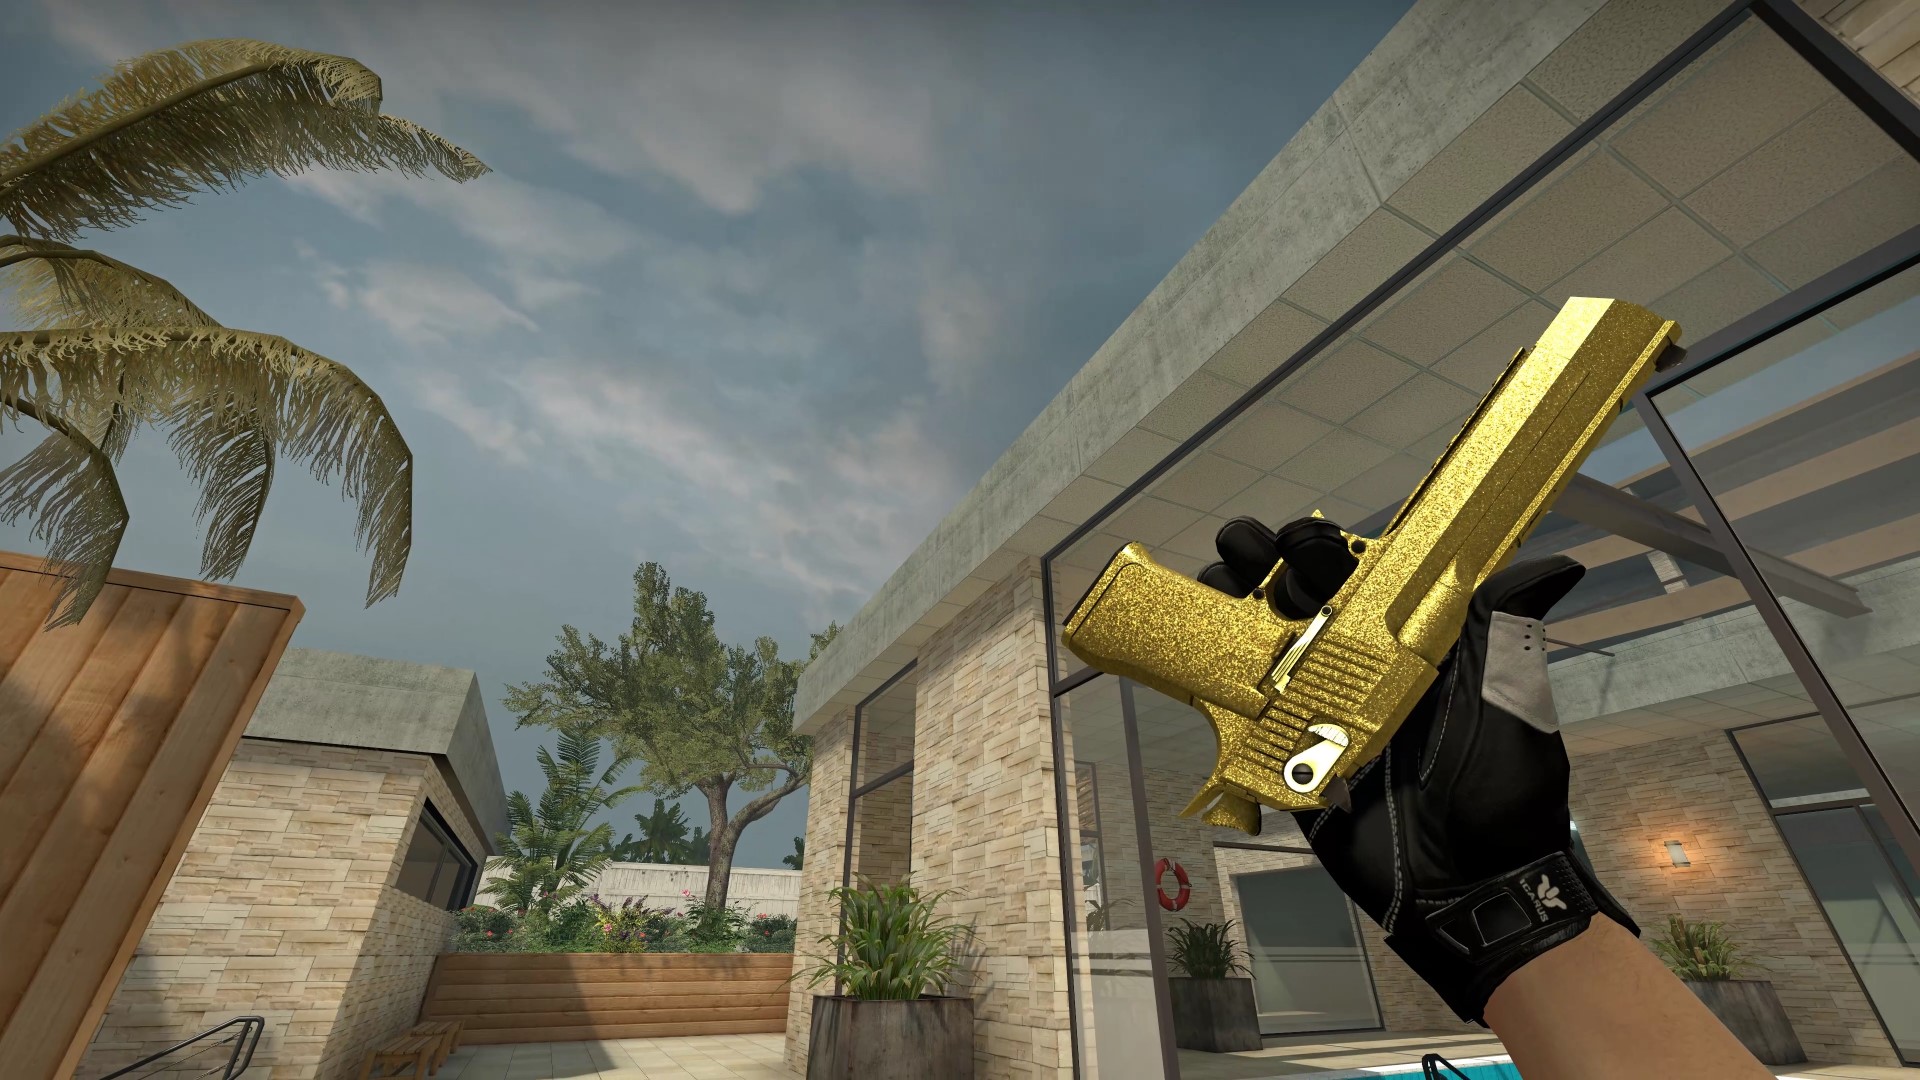 Counter-Strike 2: Will CSGO Skins Transfer Over to Source 2